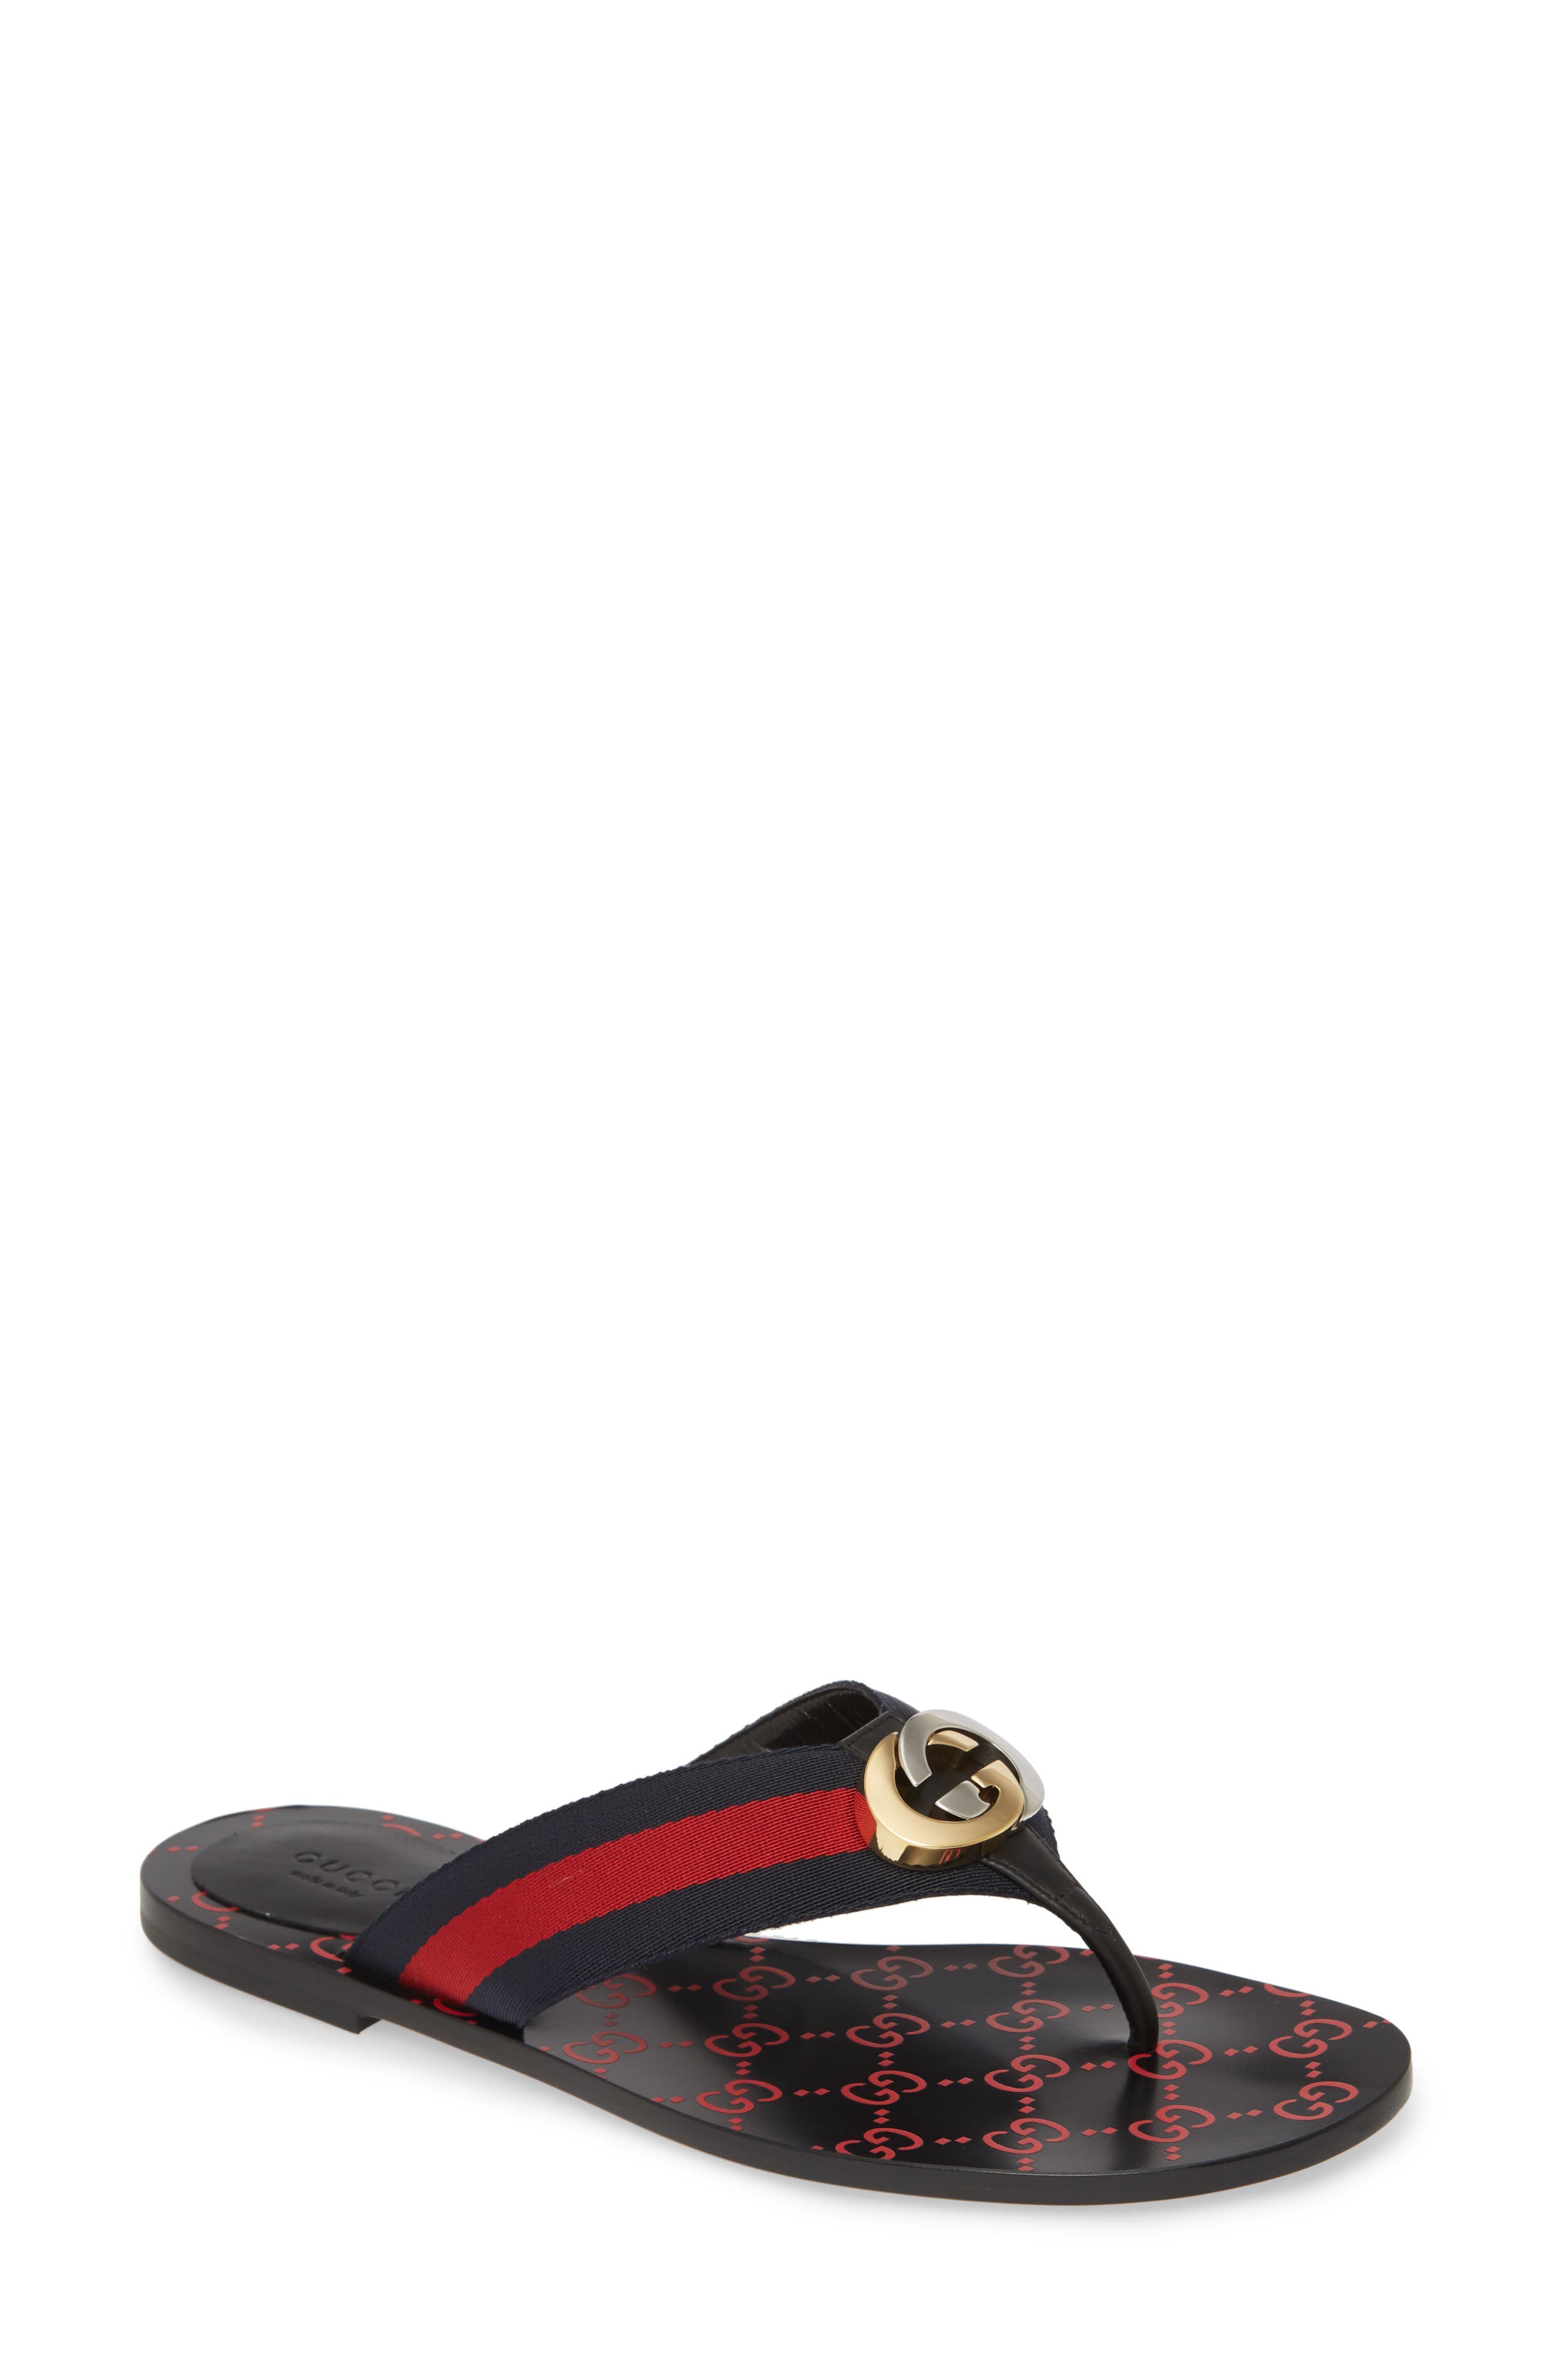 Gucci Sandals Store, 54% OFF | empow-her.com